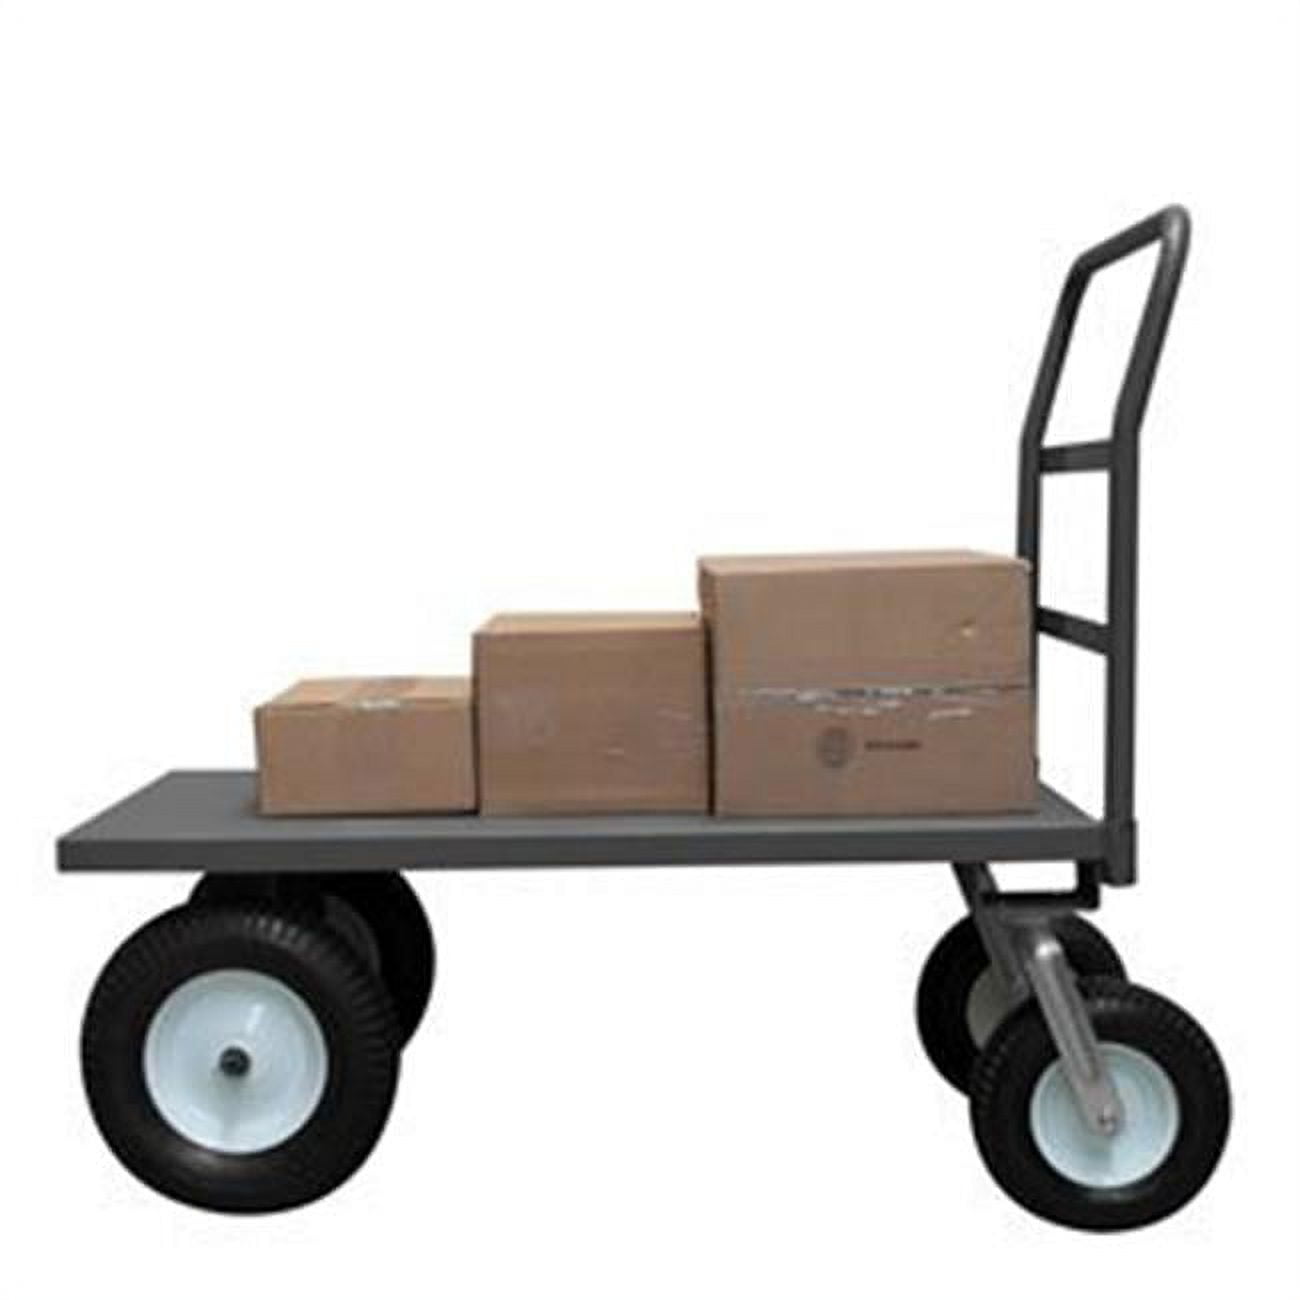 Picture of Durham PT366012-16PN95 46 in. Platform Trucks with Pneumatic Casters, Gray - 2500 lbs